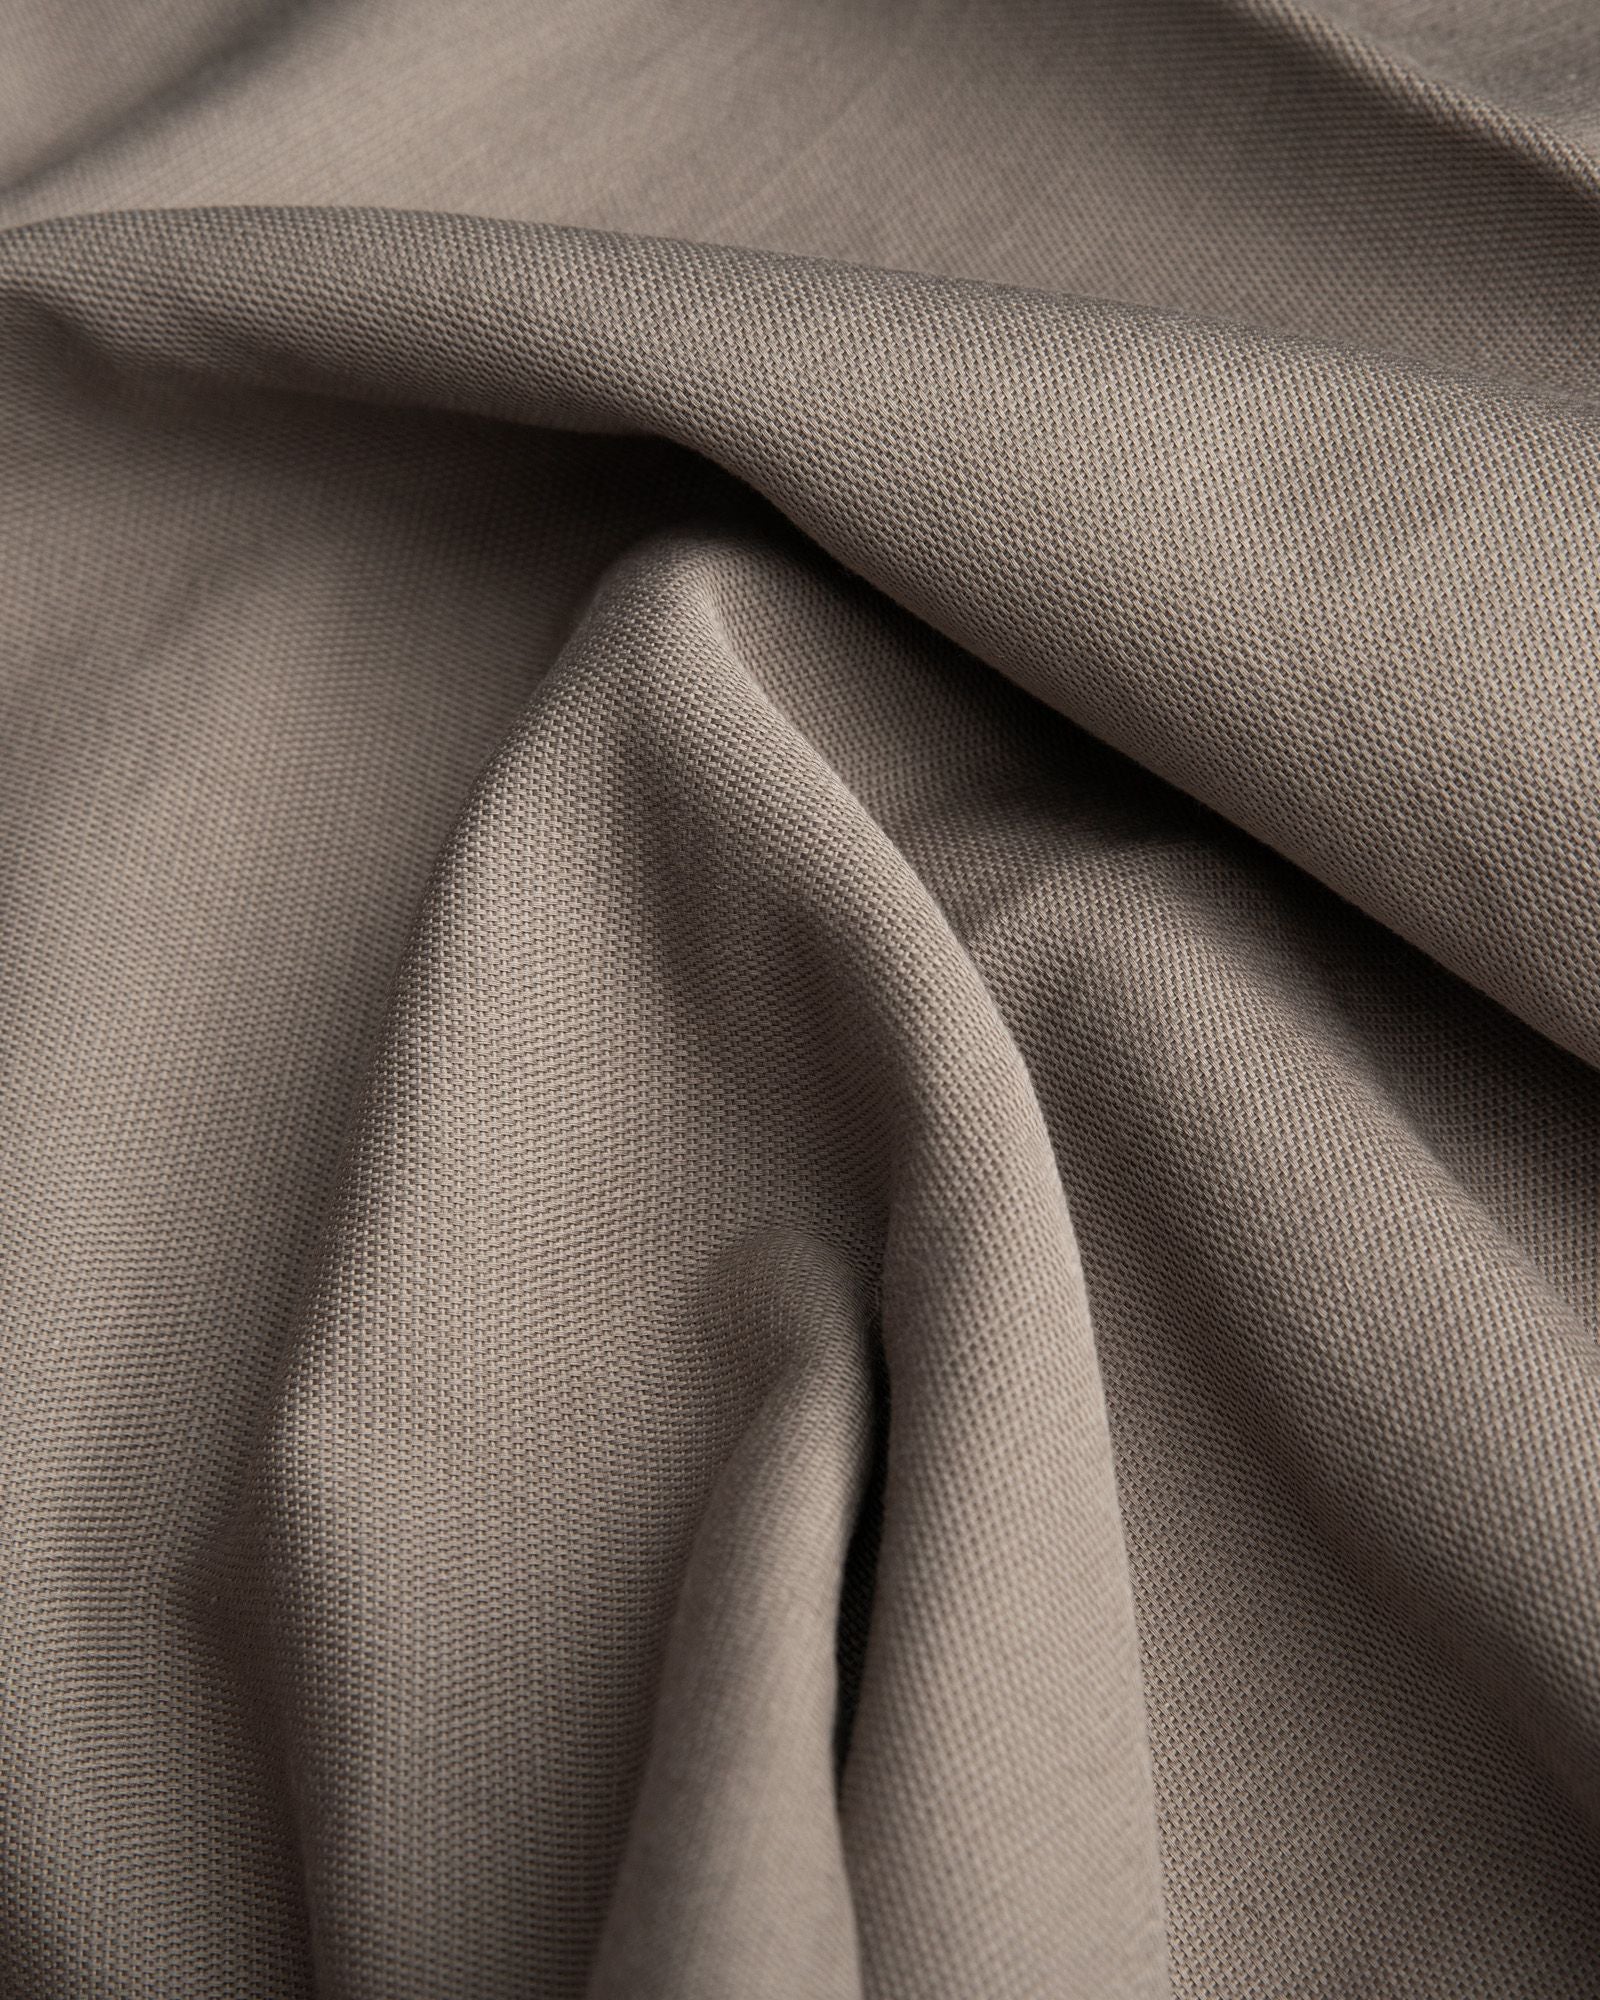 Größe: 135x 220 cm Farbe: taupe #farbe_taupe